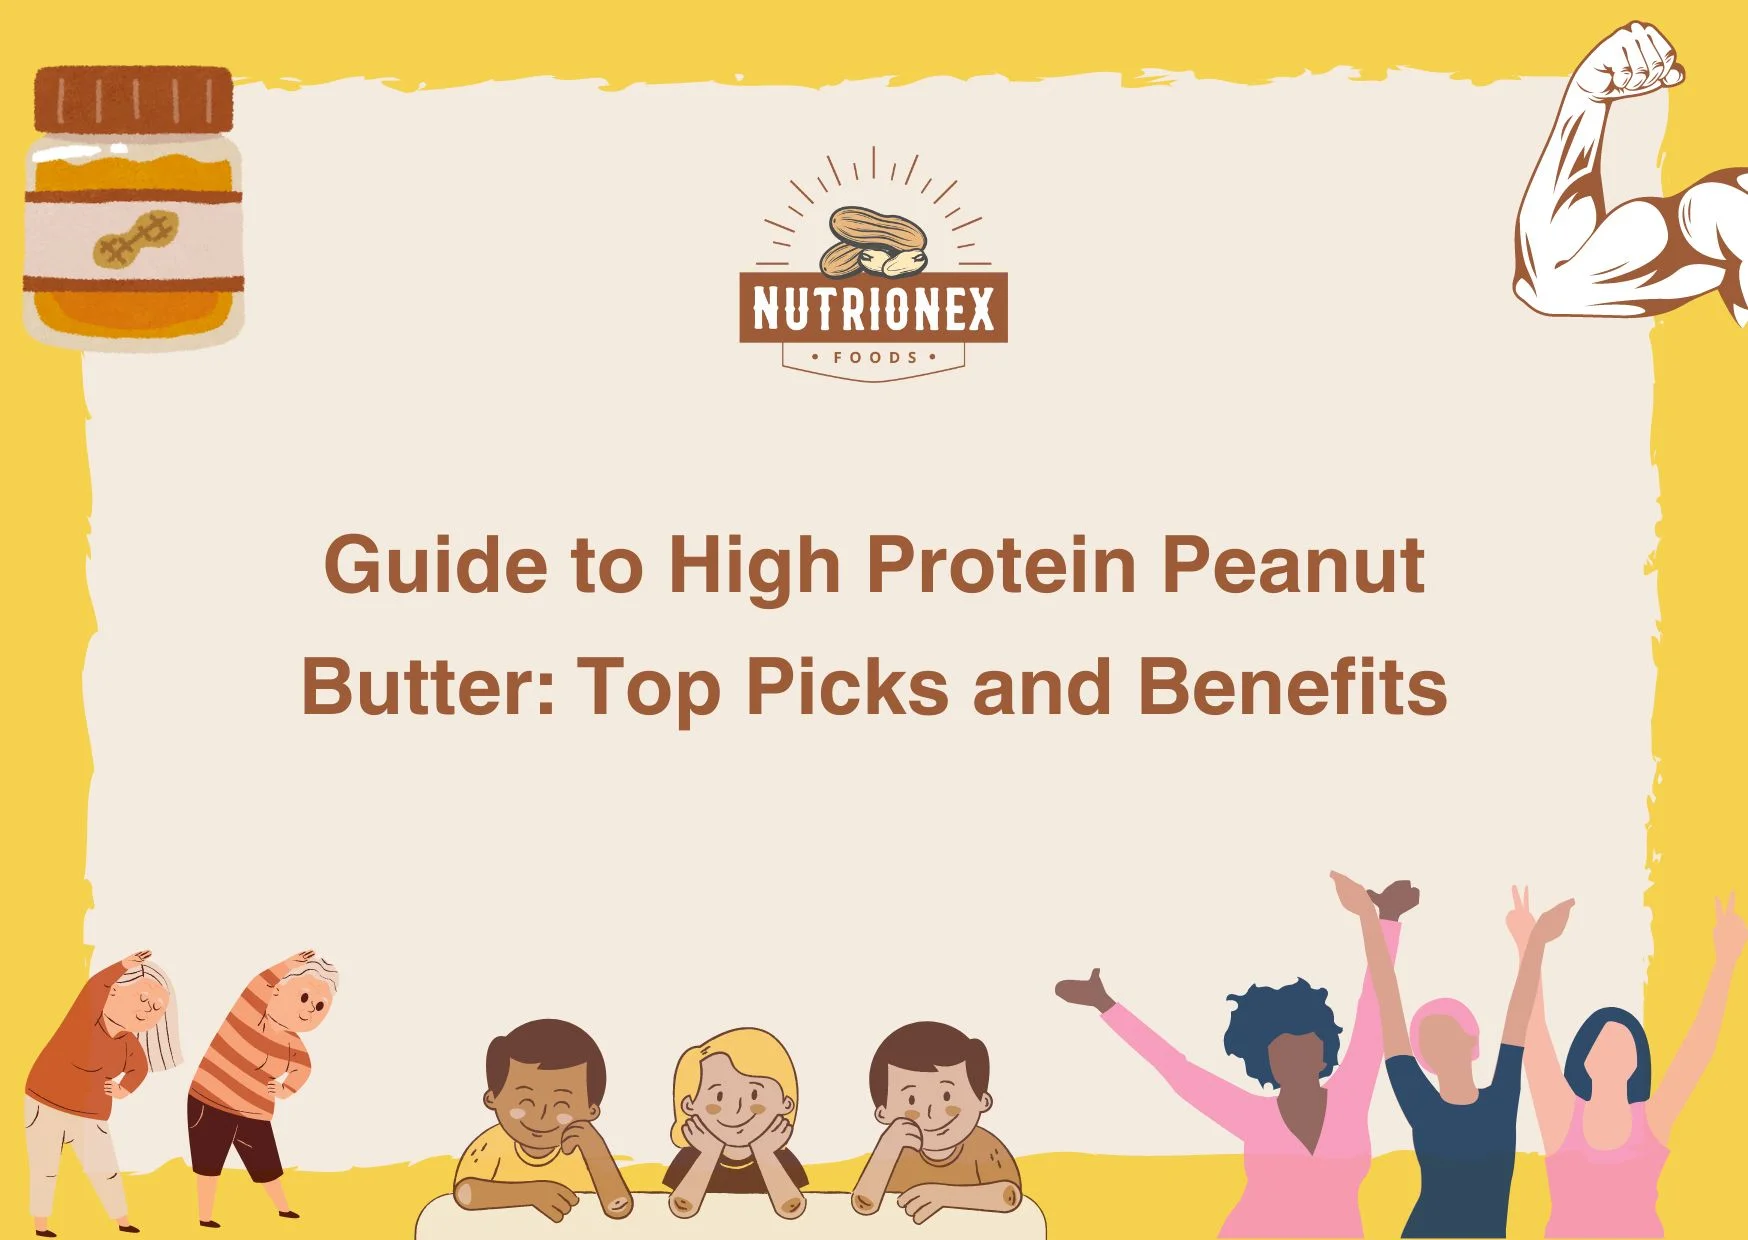 Guide To High Protein Peanut Butter: Top Picks And Benefits